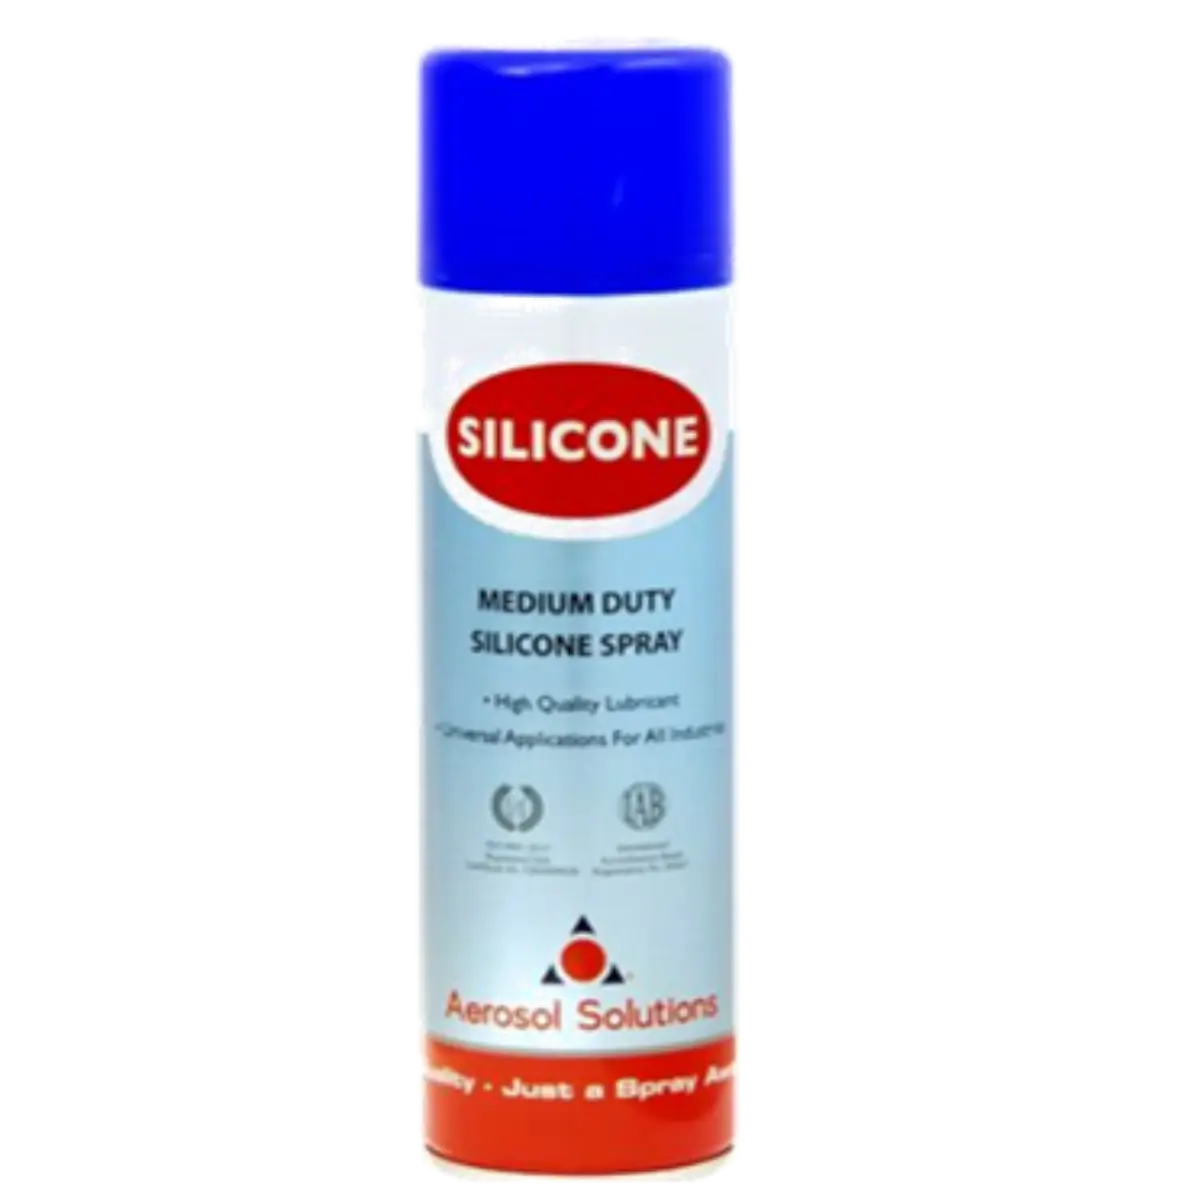 Highly efficient universal silicone spray suitable for use in a wide variety of industrial and domestic applications